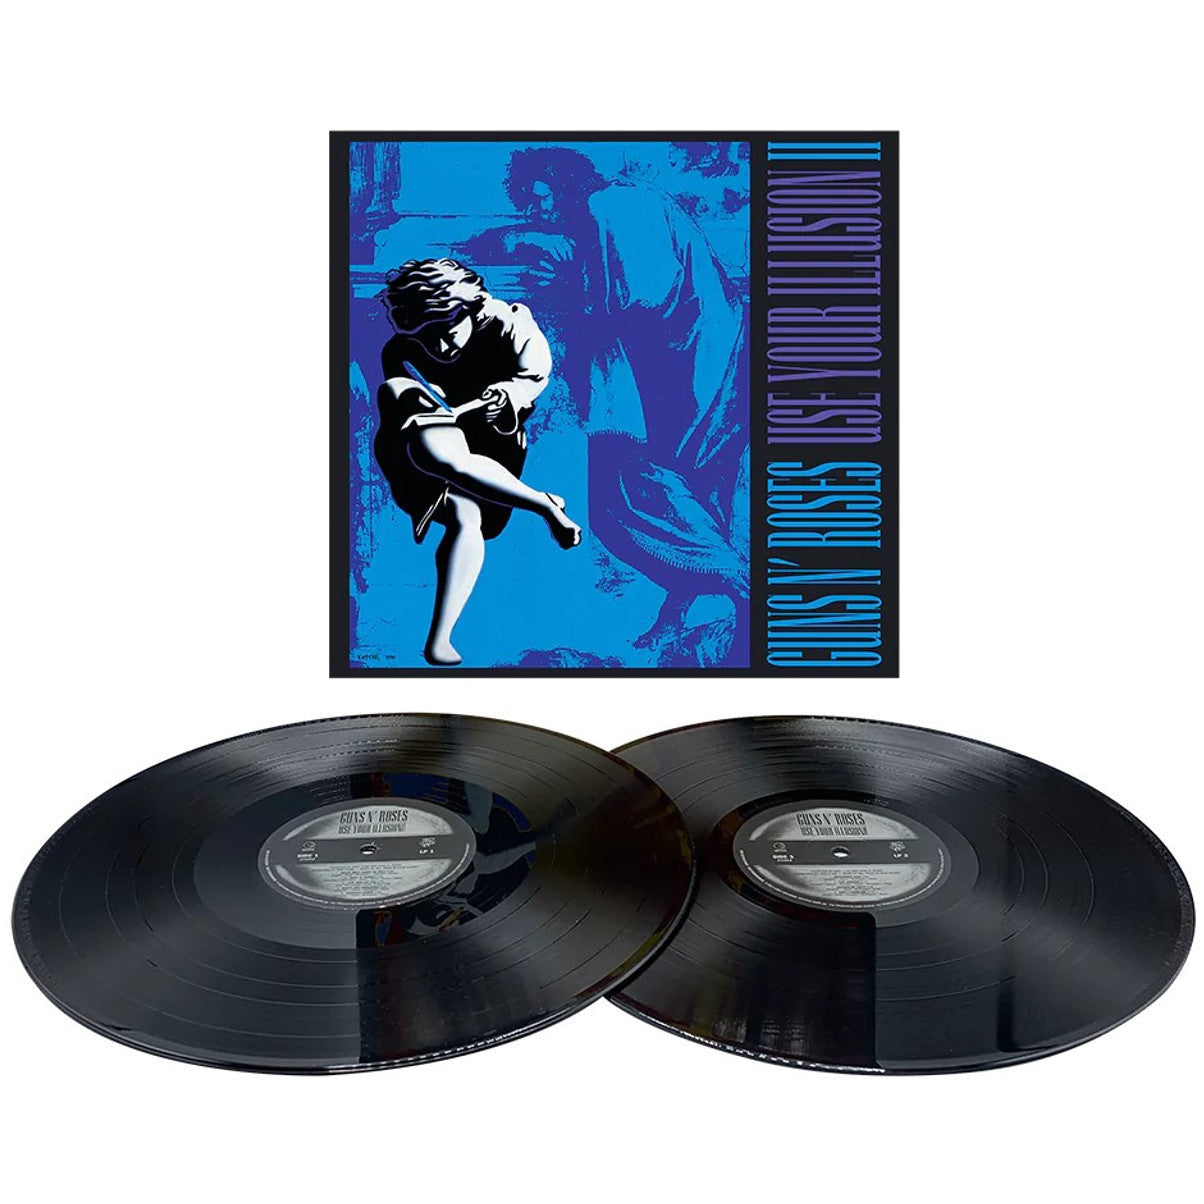 Guns N' Roses – Use Your Illusion II – LP